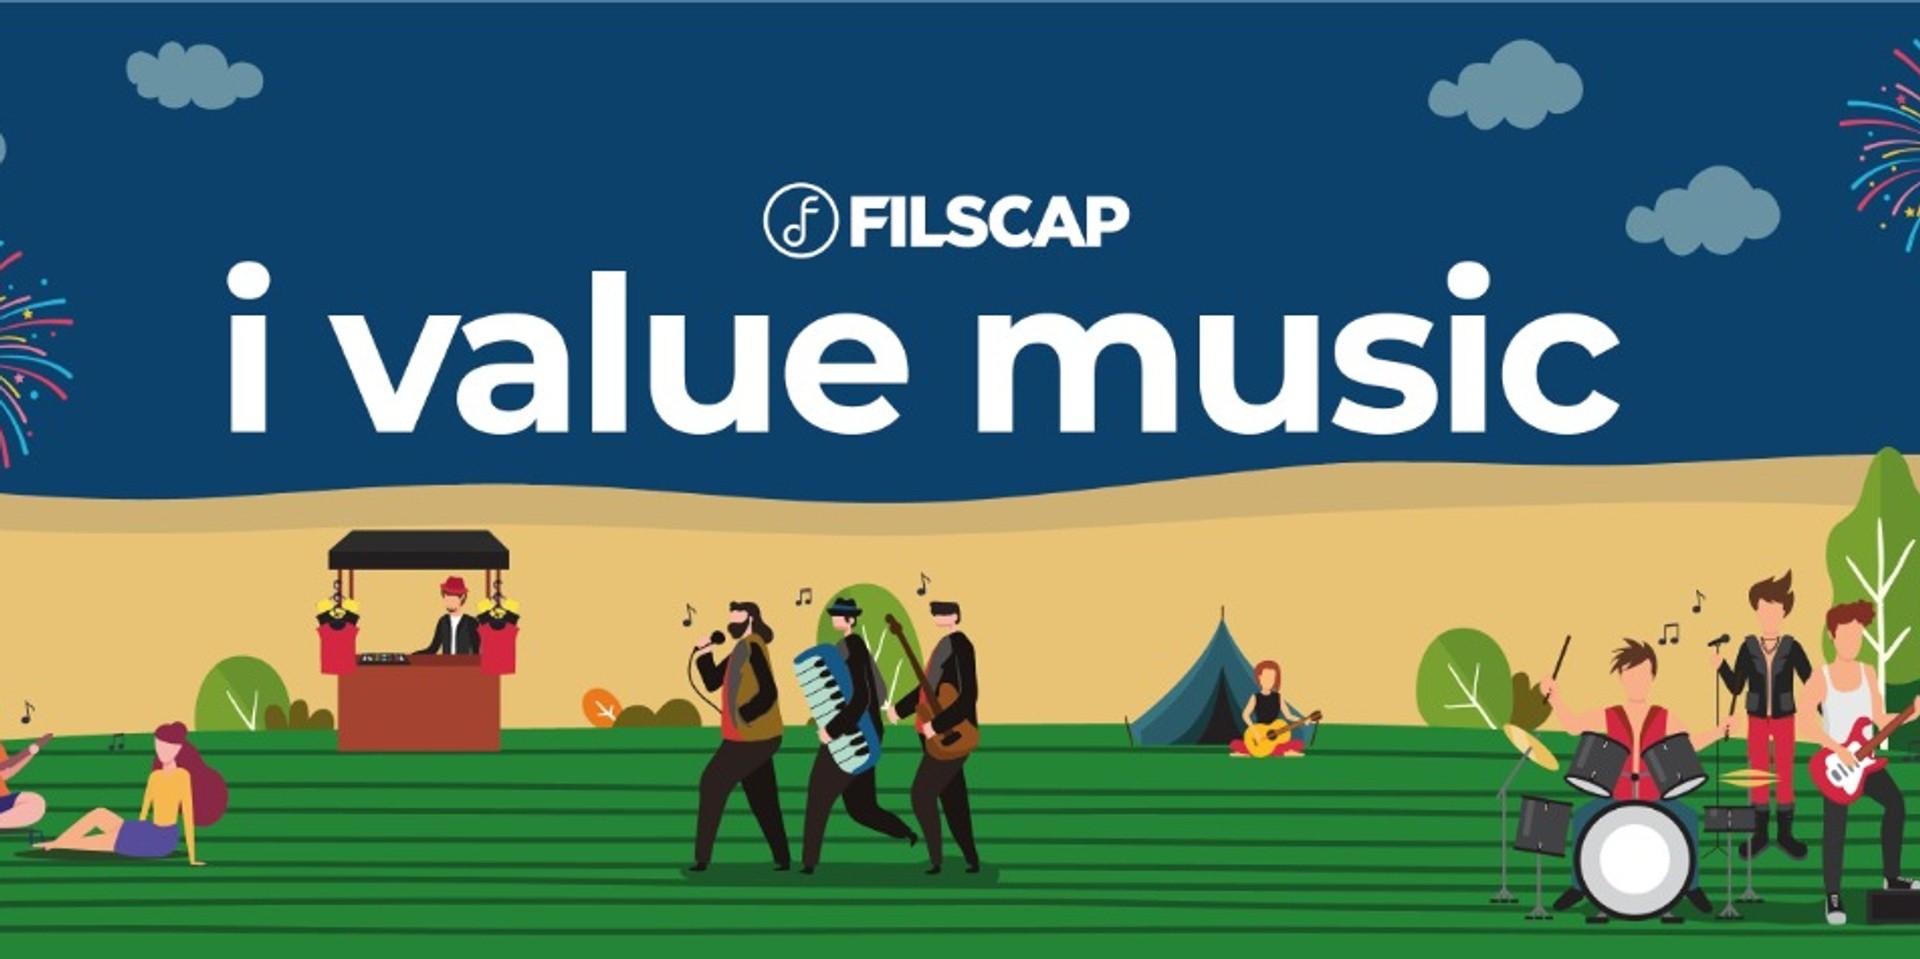 FILSCAP extends financial aid to its members